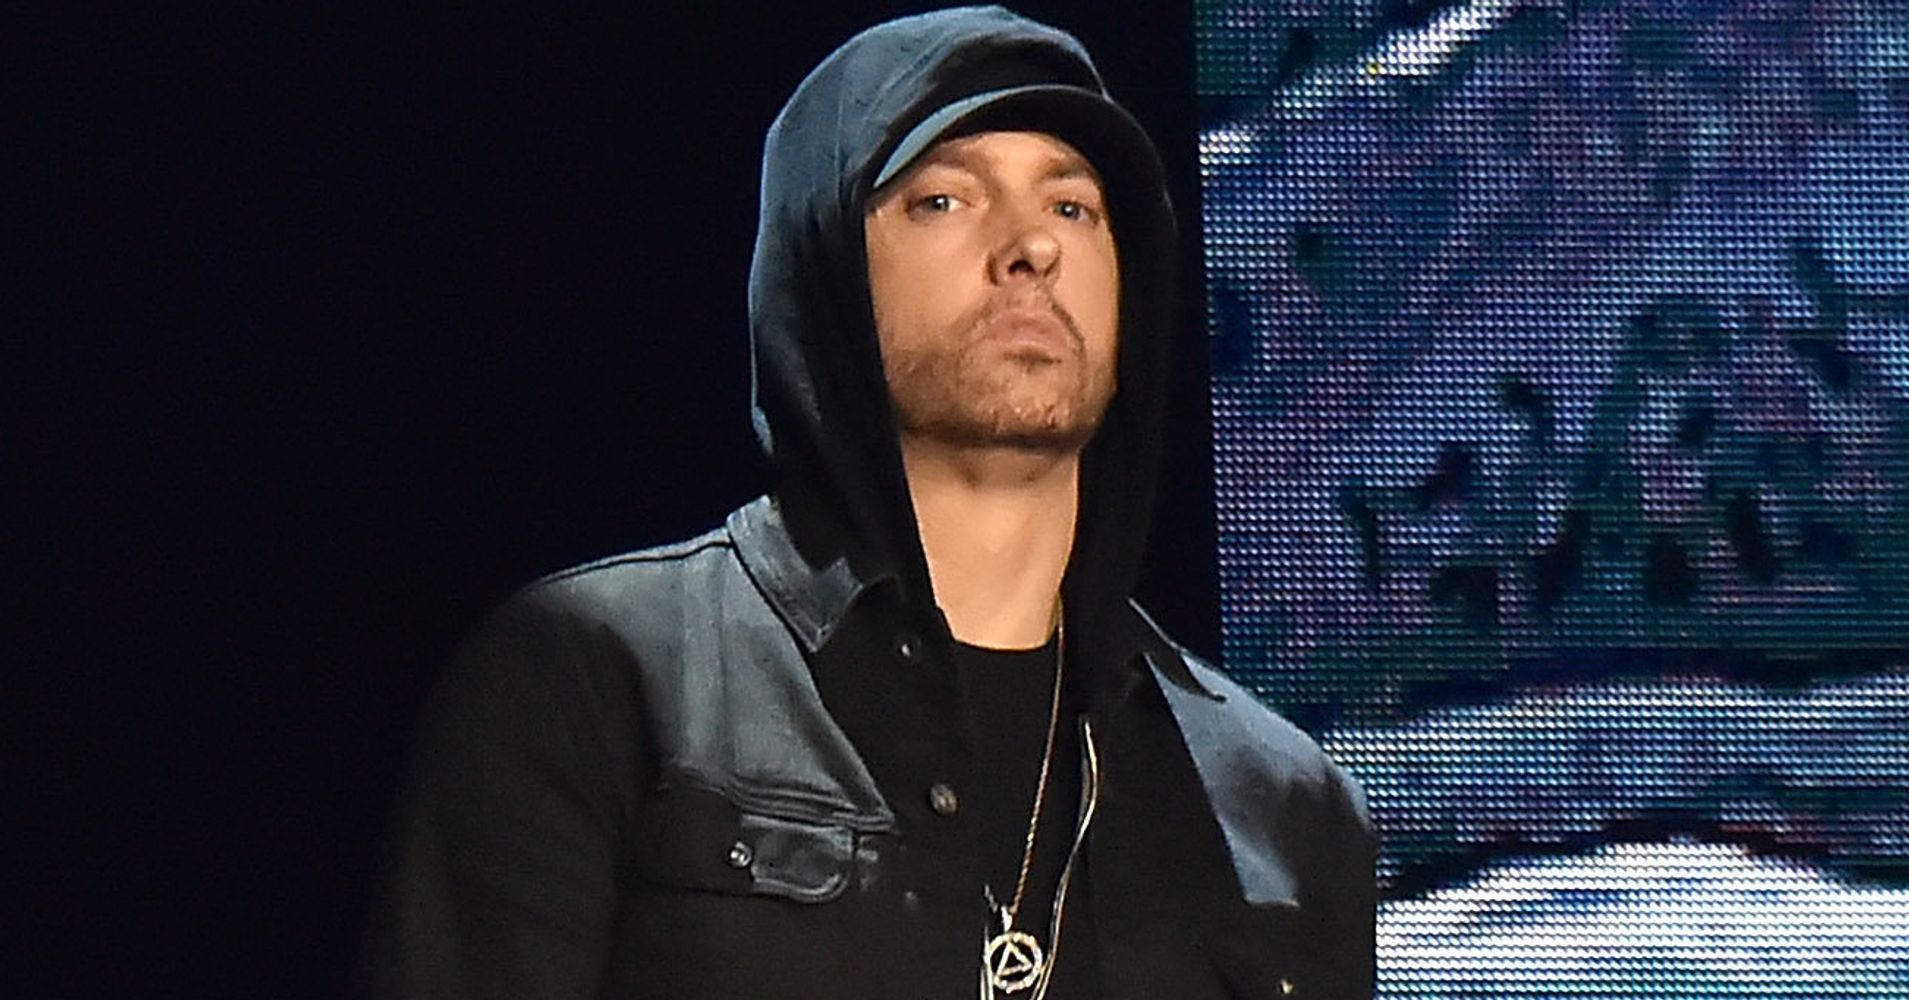 Eminem Rips Systemic Racism And White Privilege In New Anthem 'Untouchable' | HuffPost1907 x 1000